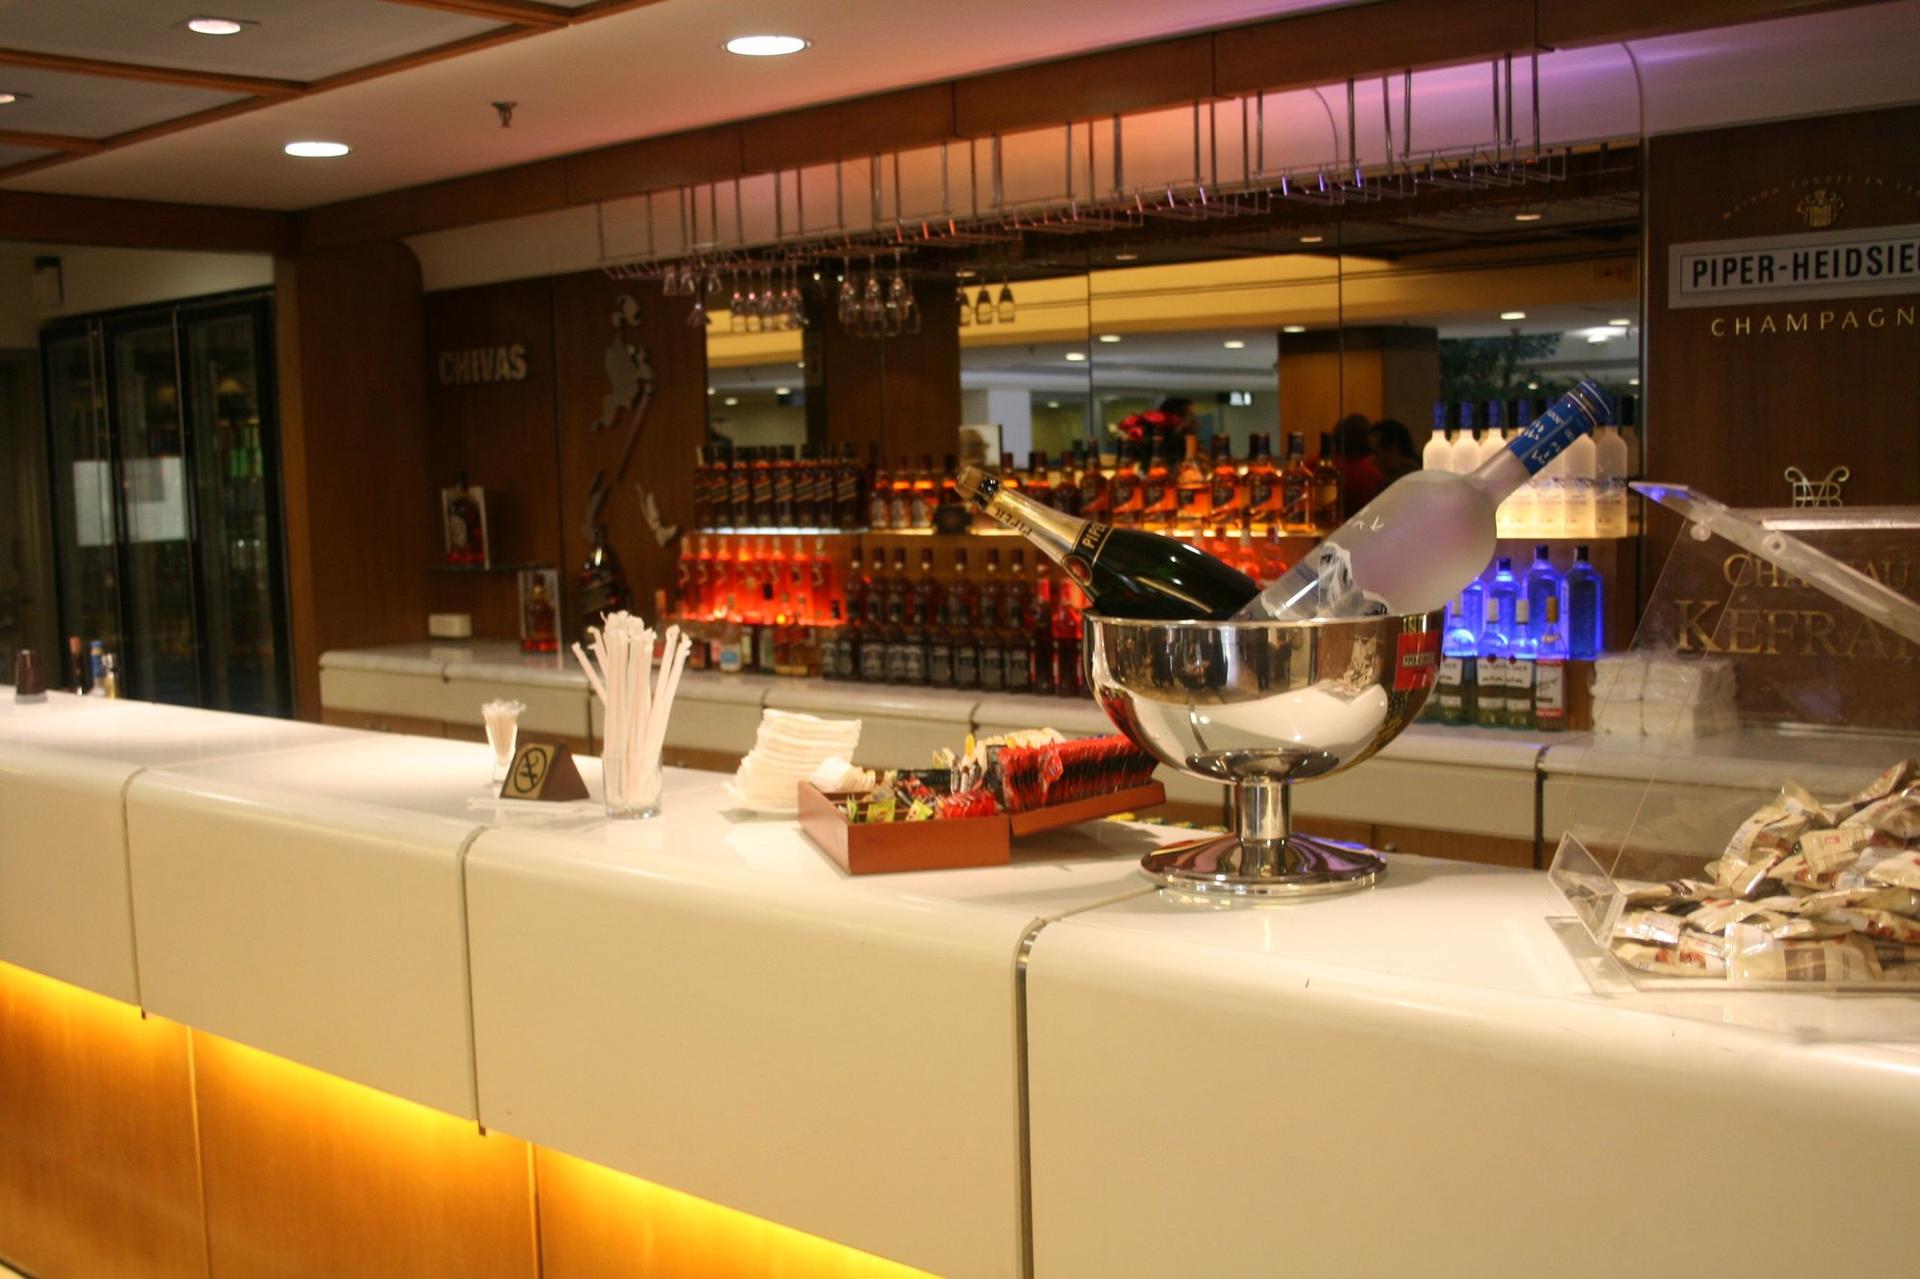 Middle East Airlines Cedar Lounge image 5 of 18